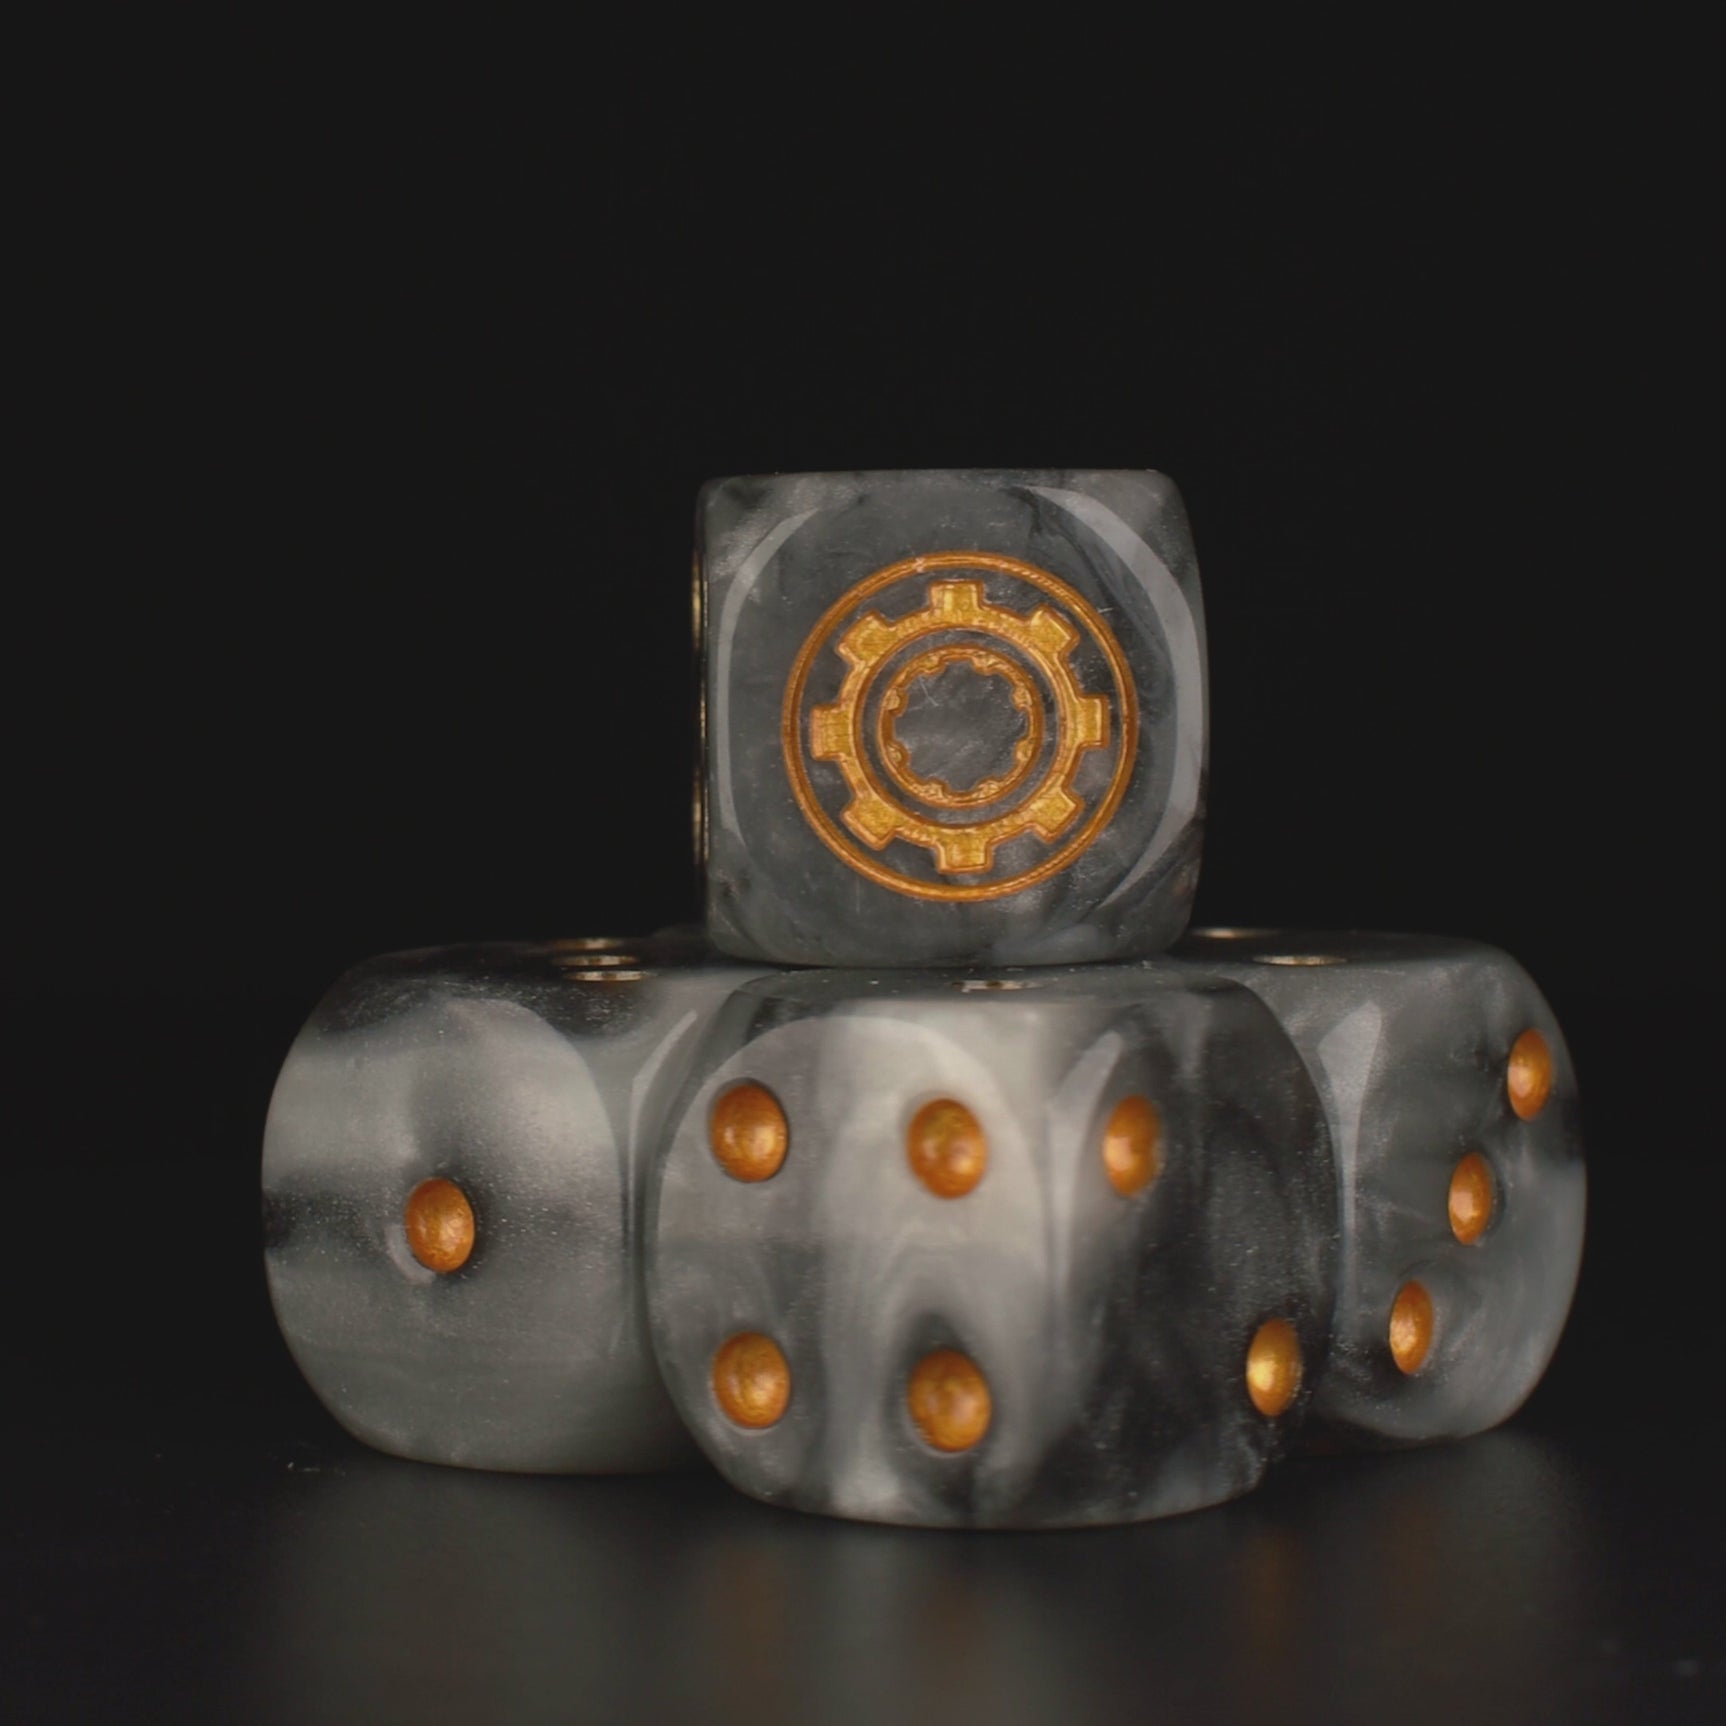 Engineers Officially Licensed Guildball Dice Set